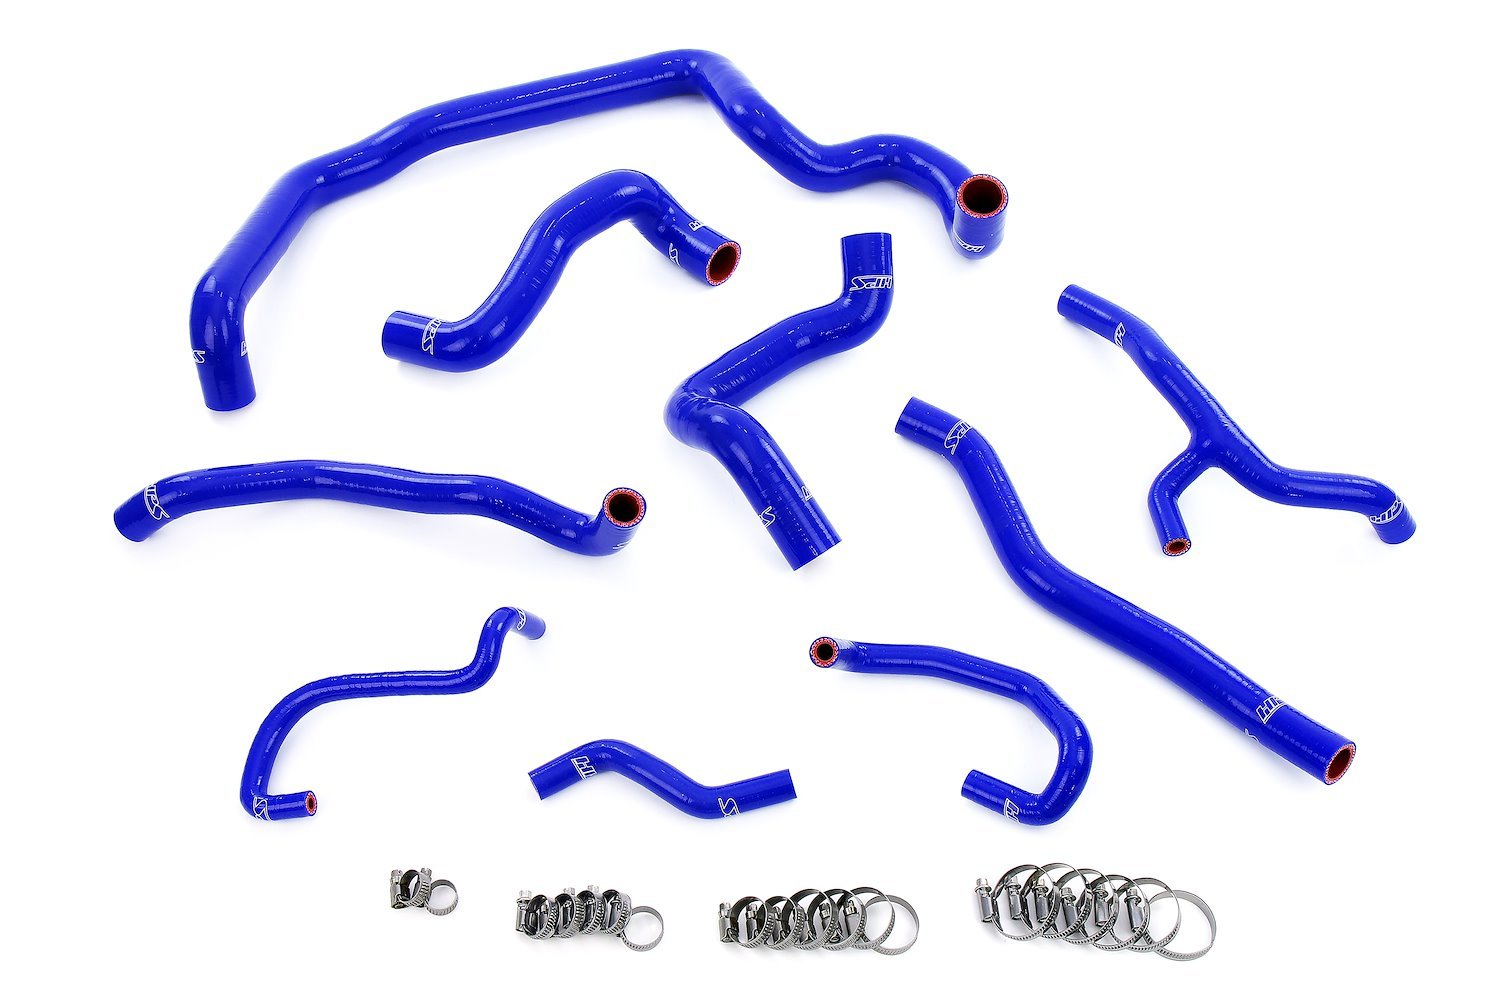 57-1997-BLUE Coolant Hose Kit, 3-Ply Reinforced Silicone Hoses, For Radiator, Heater, Water Pump, Expansion Tank